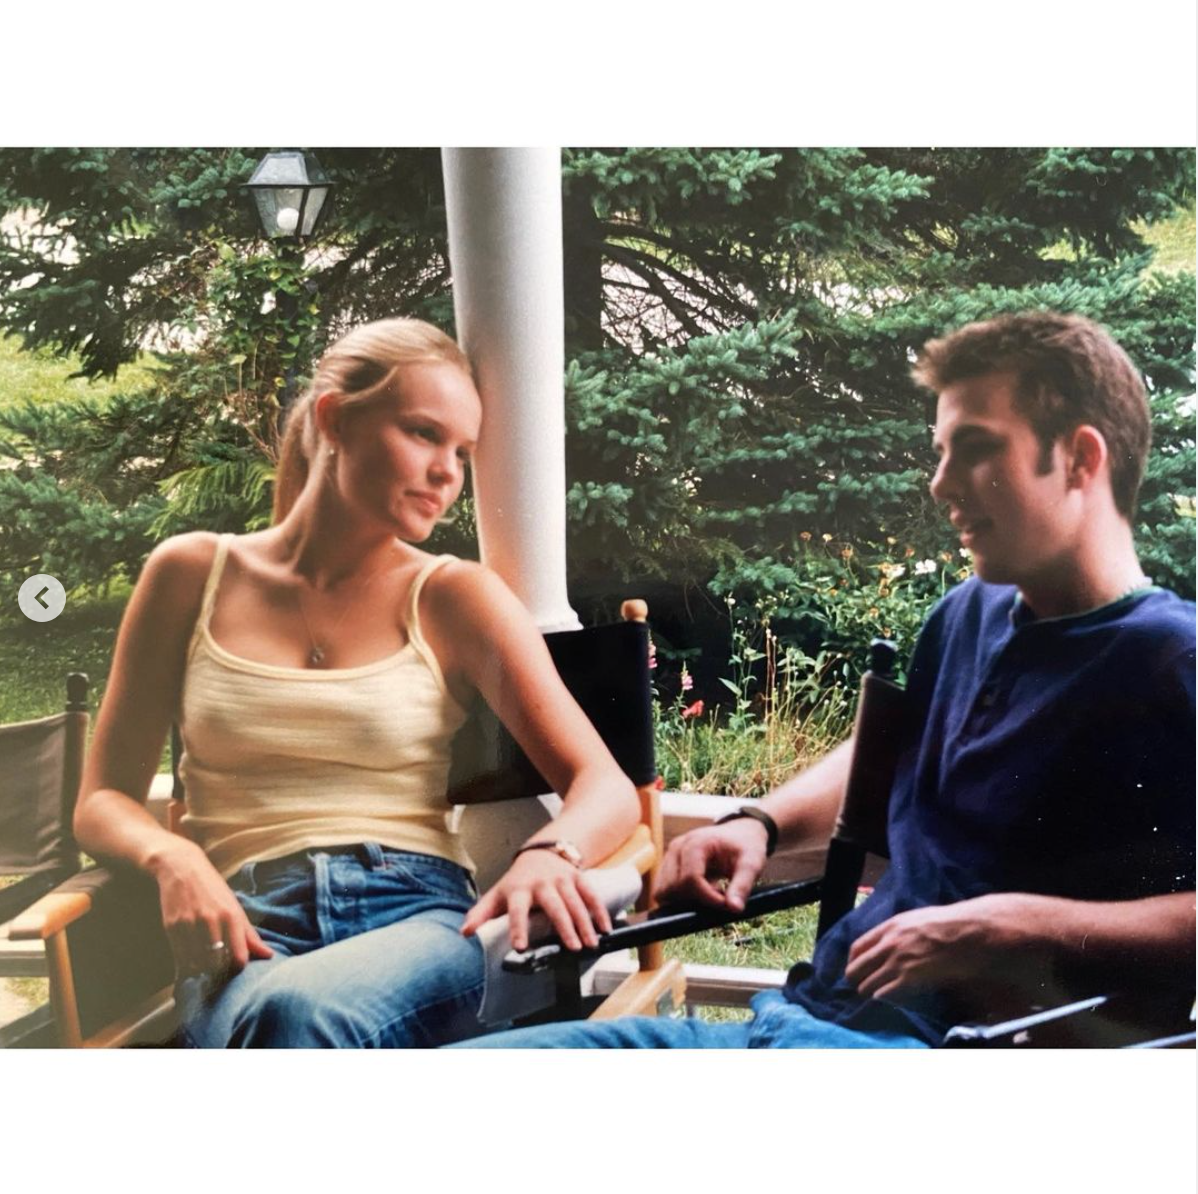 Kate and Chris on set in the throwback photo